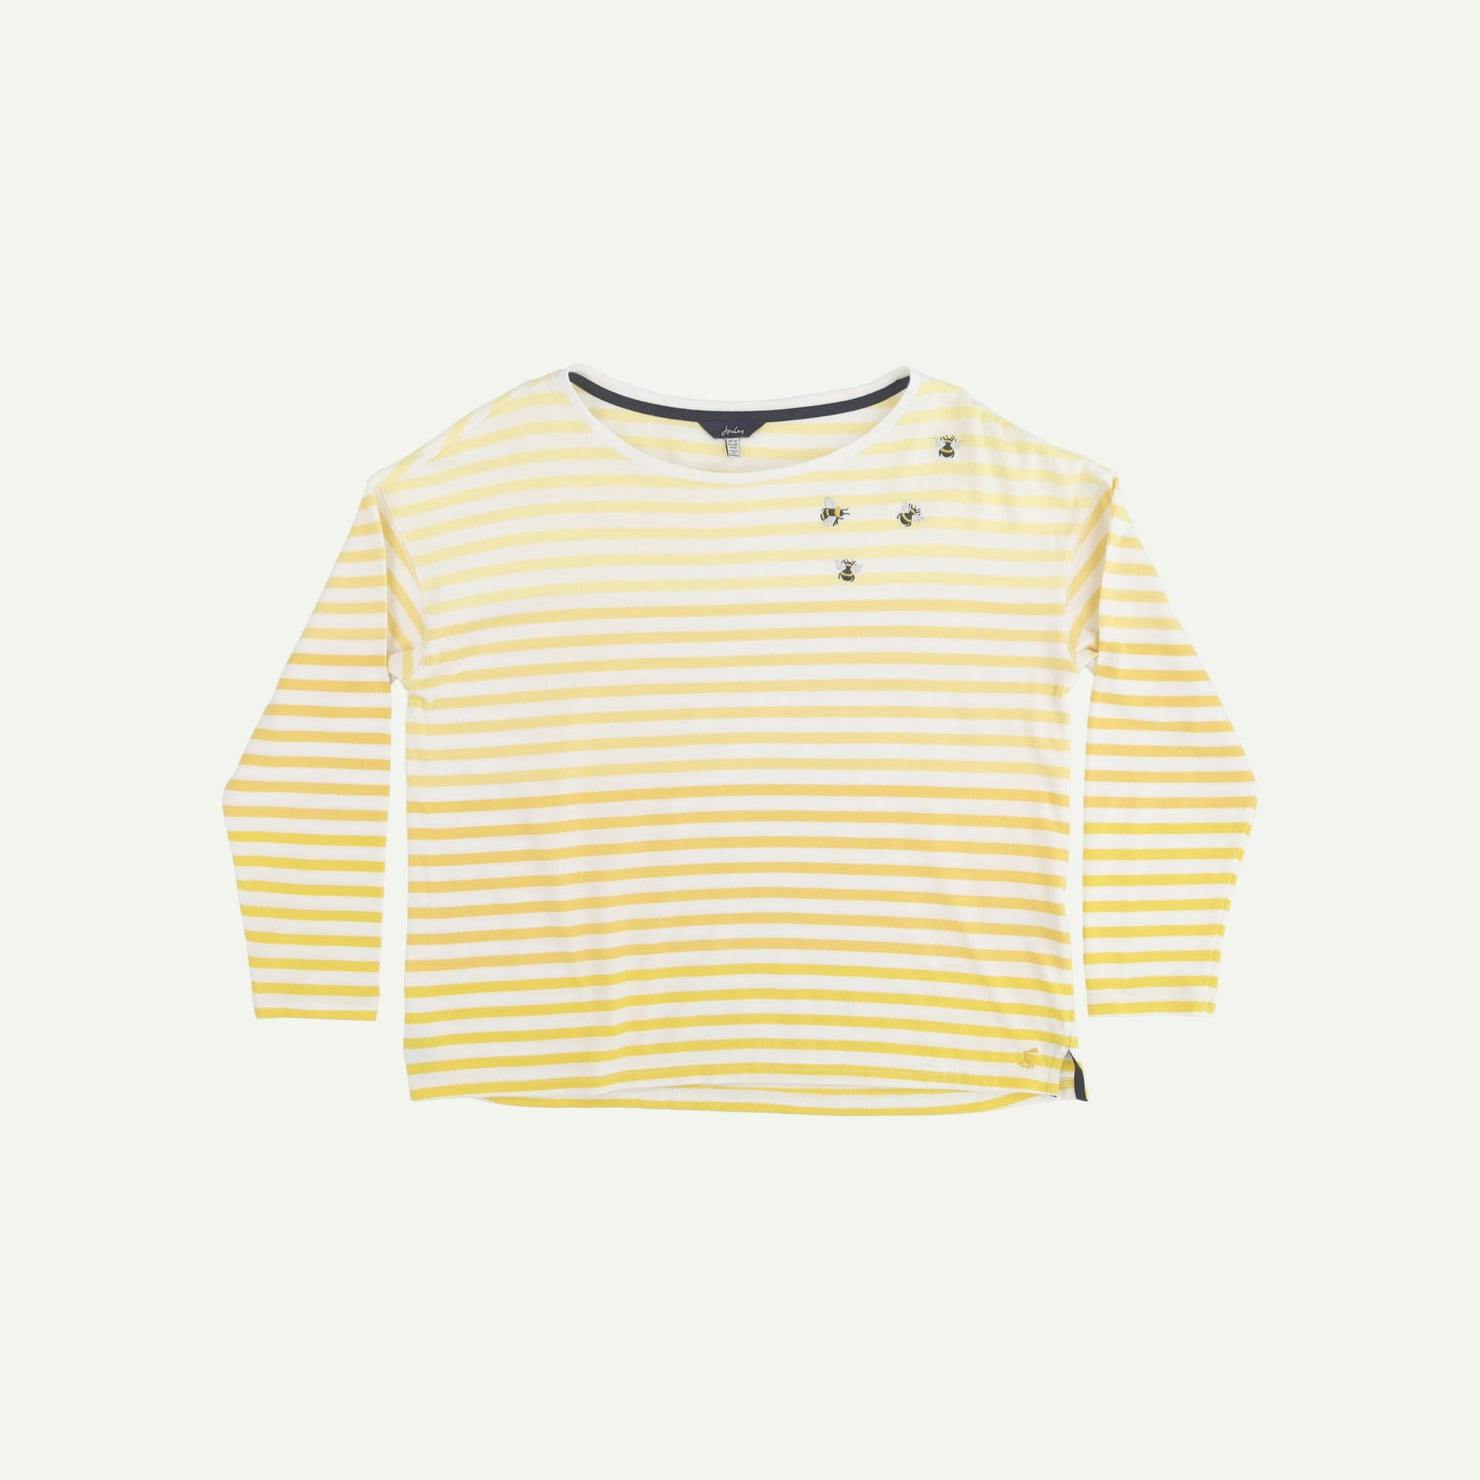 Joules Pre-loved Yellow Top